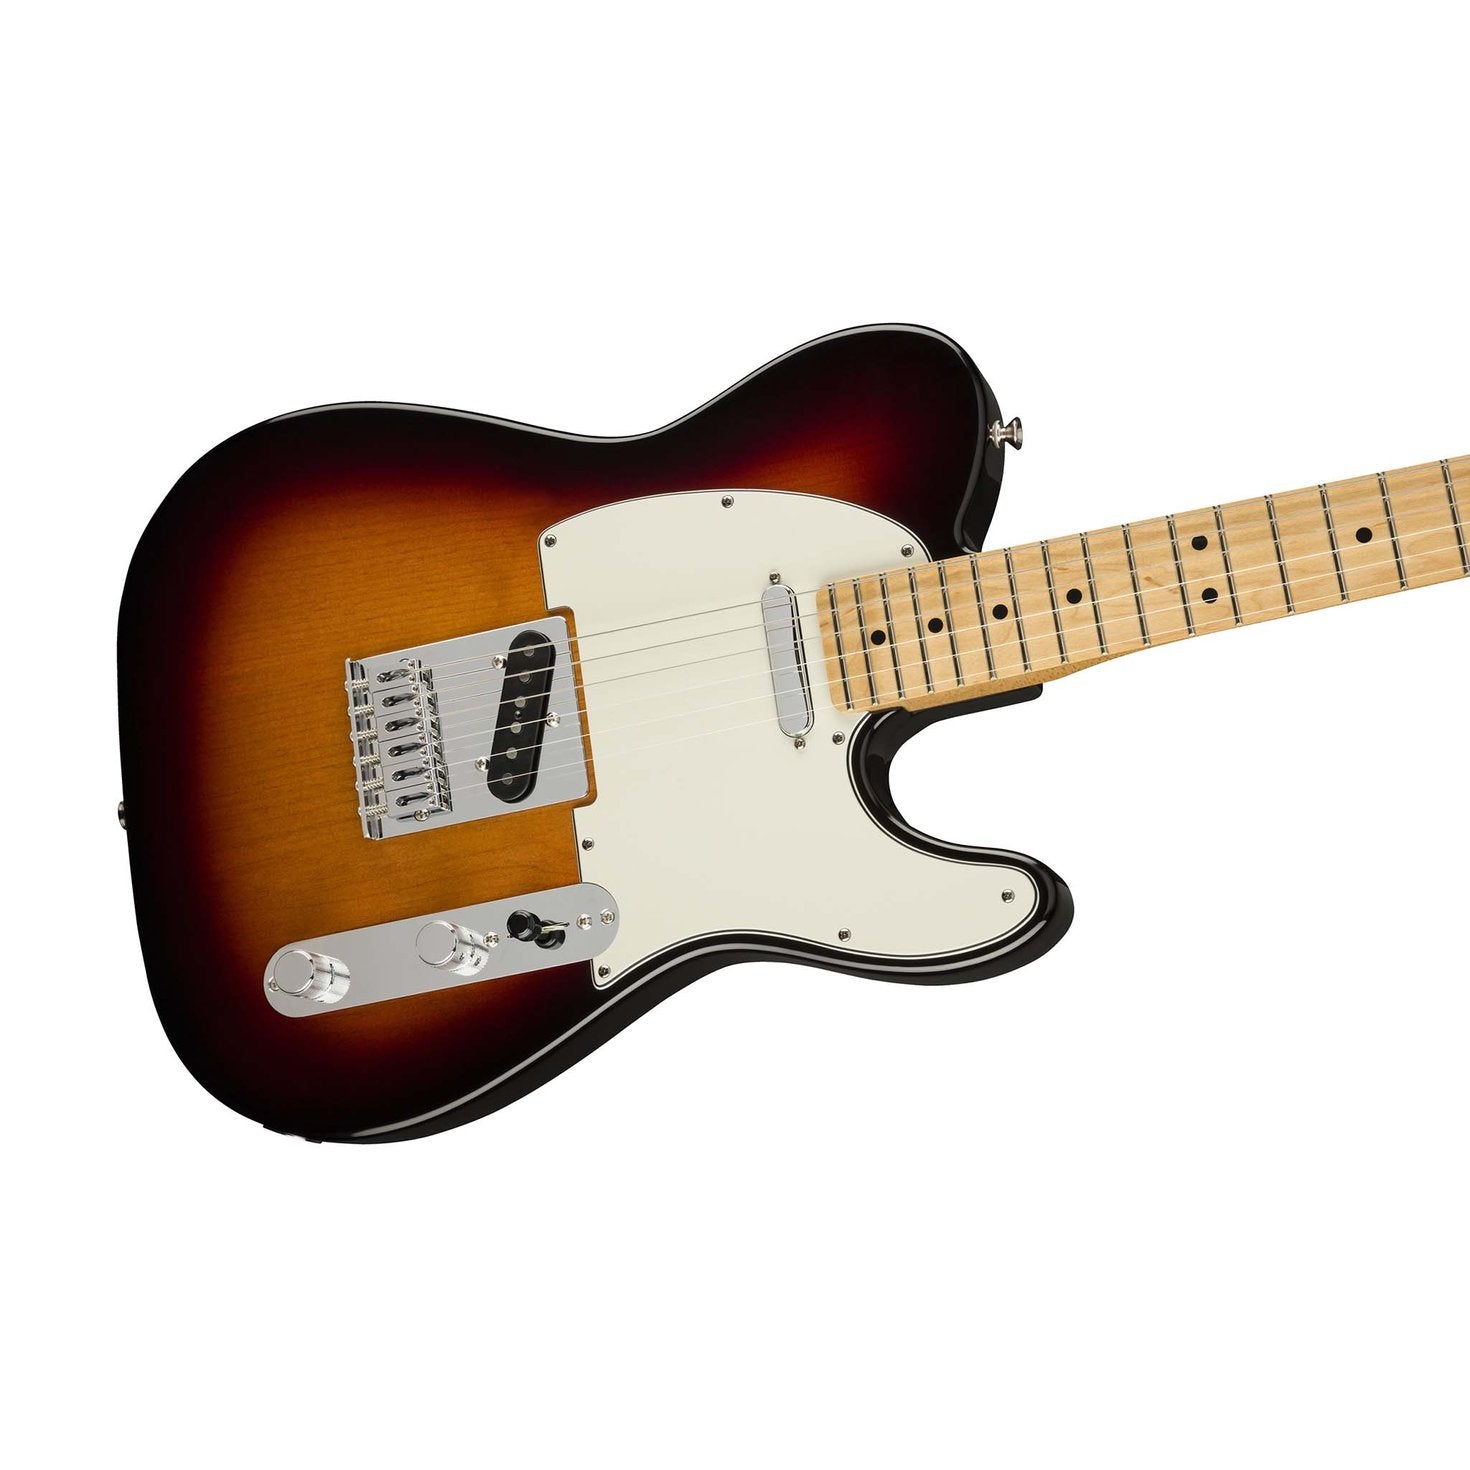 Fender Player Telecaster Electric Guitar, Maple FB, 3-Tone Sunburst, FENDER, ELECTRIC GUITAR, fender-eletric-guitar-f03-014-5212-500, ZOSO MUSIC SDN BHD